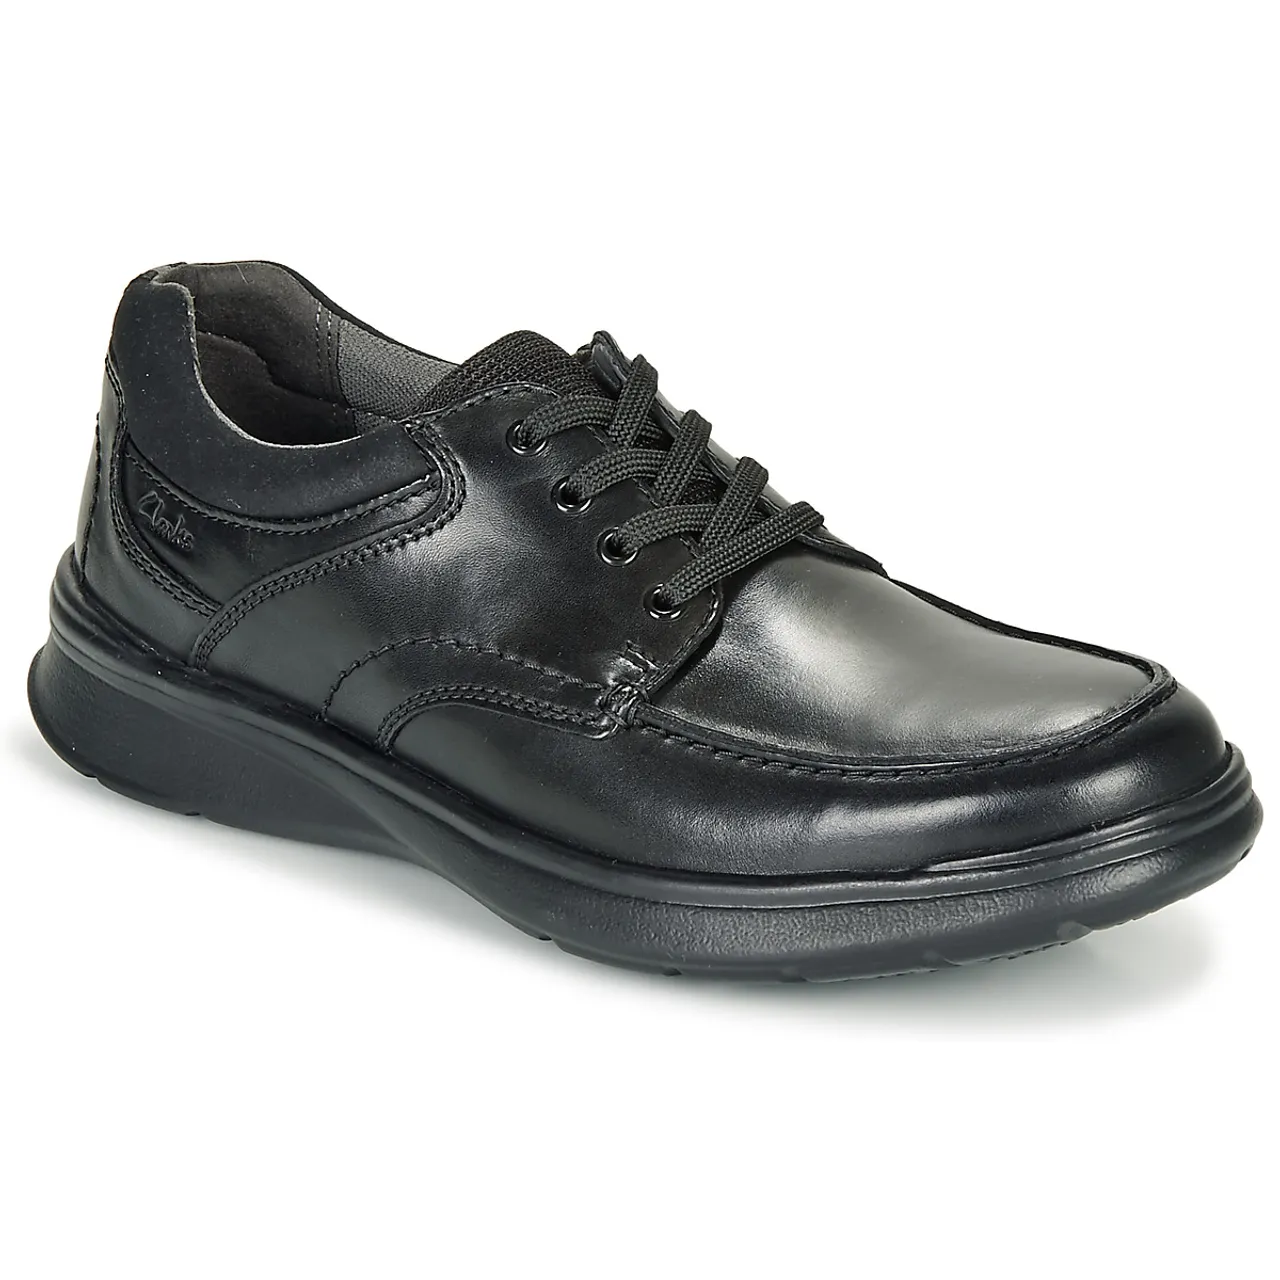 Clarks  COTRELL EDGE  men's Casual Shoes in Black